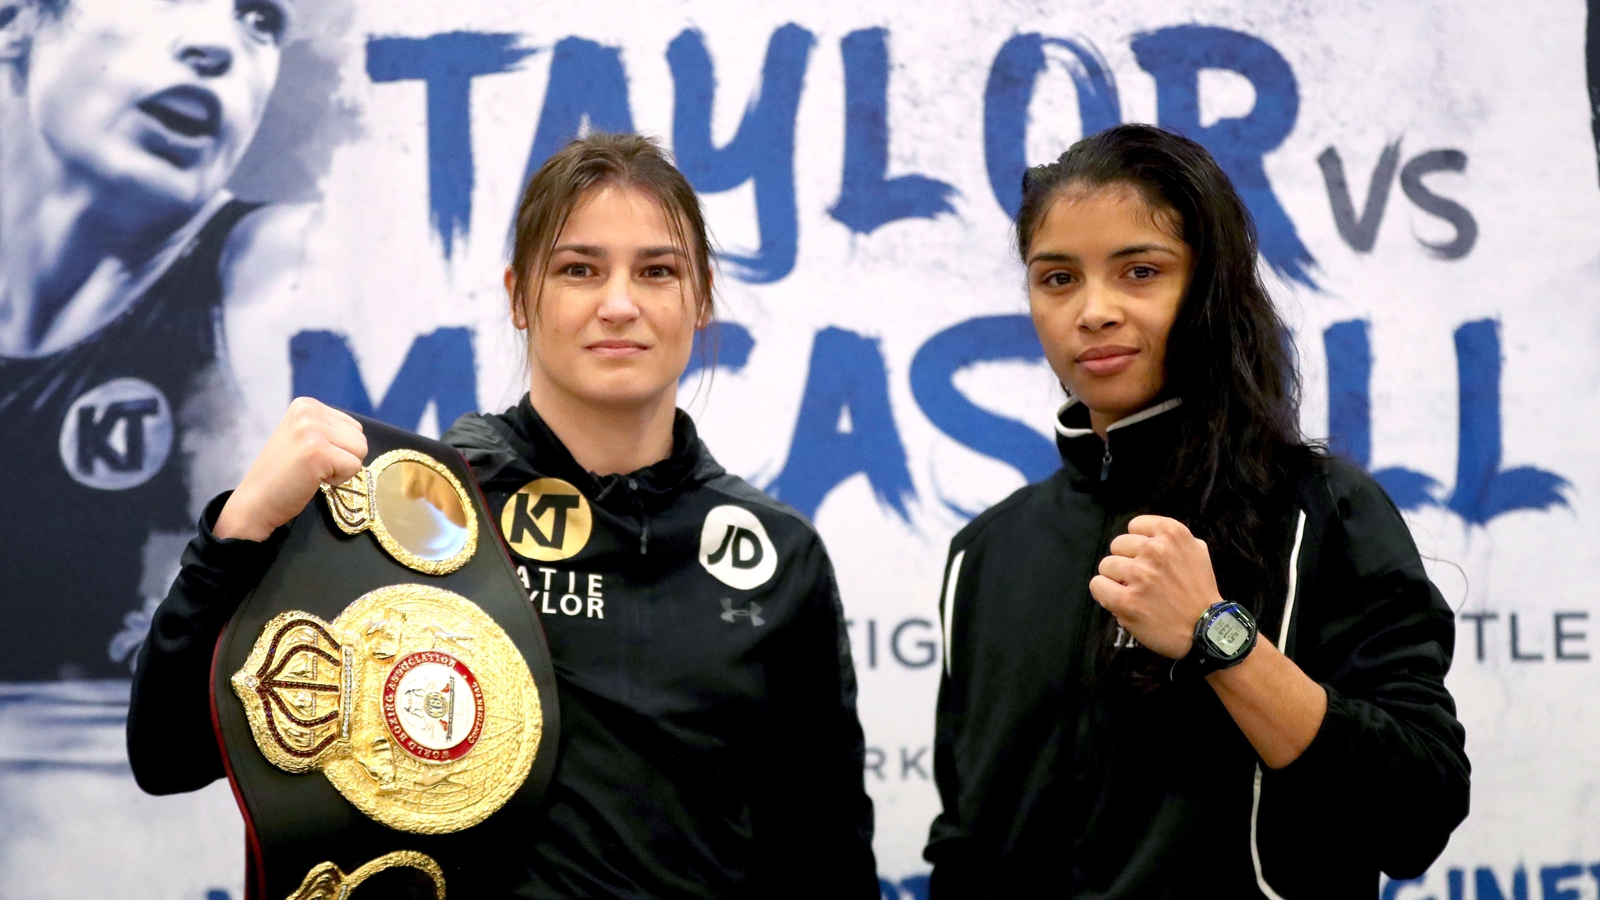 Katie Taylor shares more with her opponent than a ring